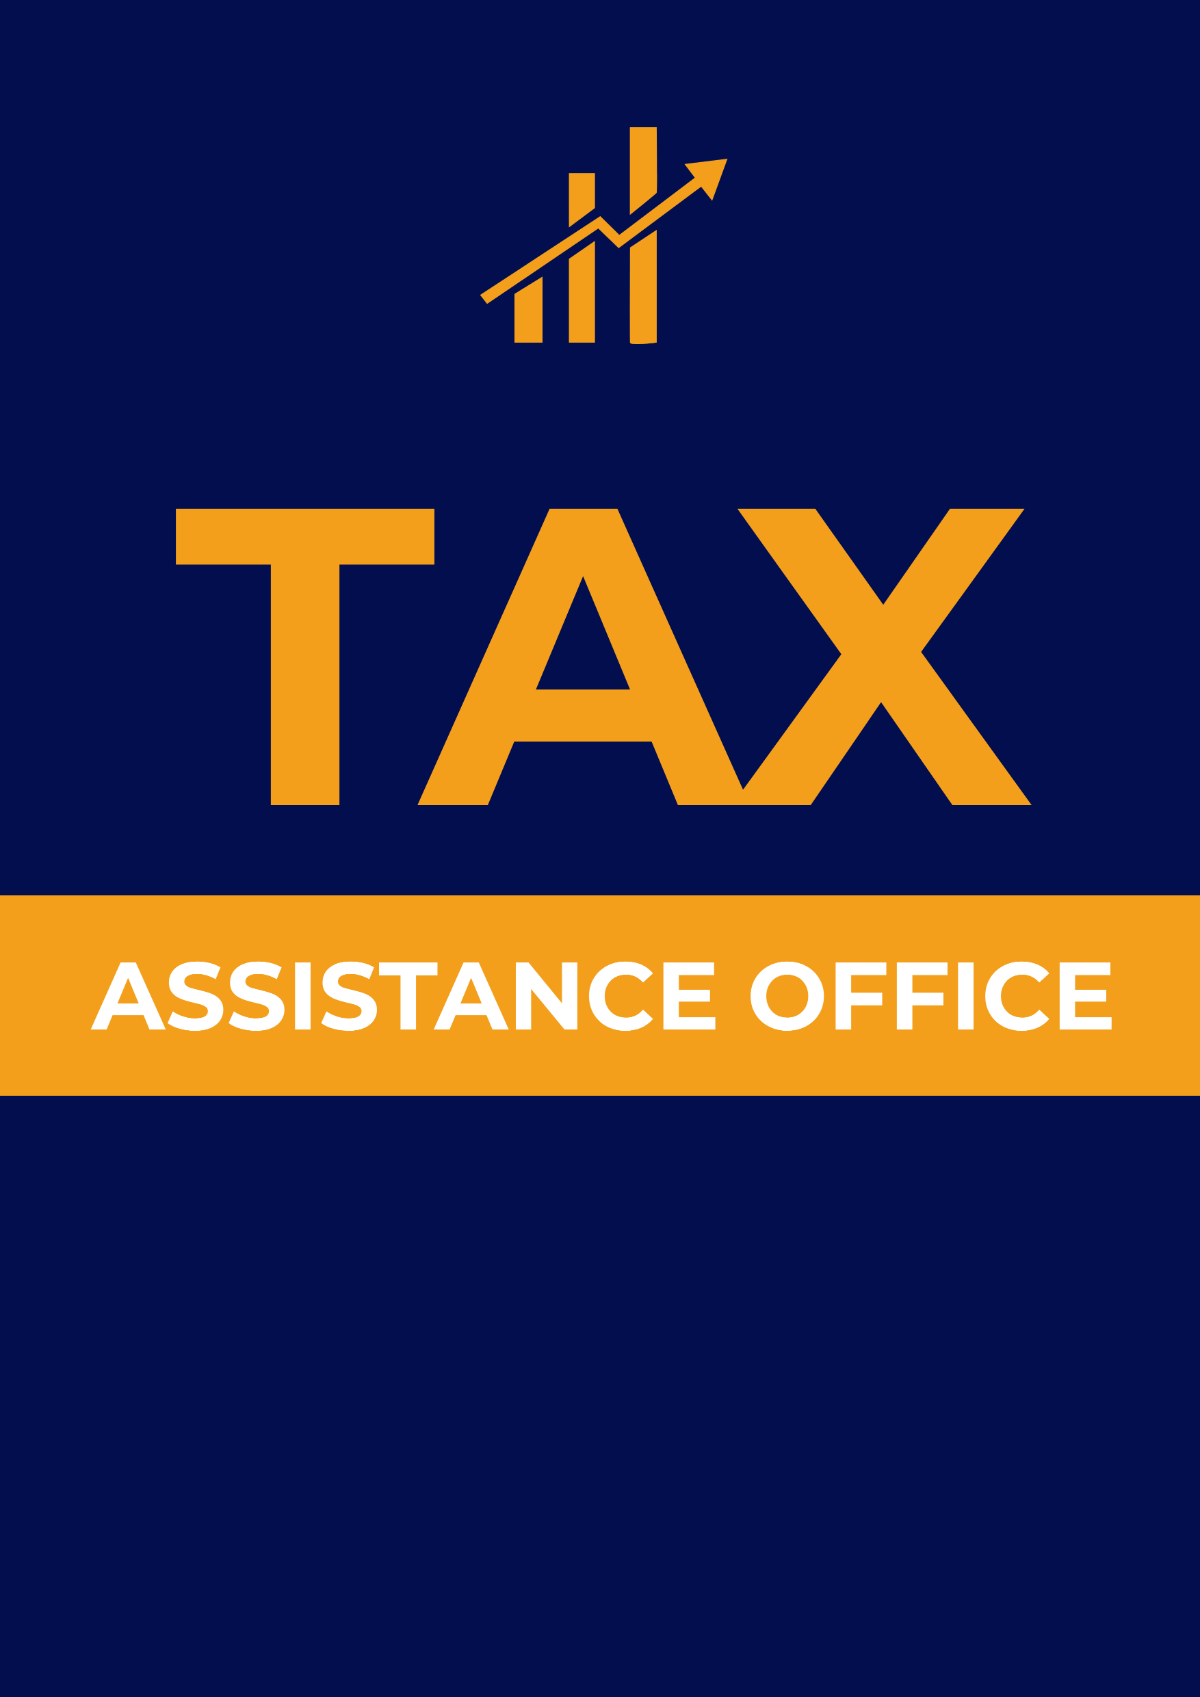 Free Tax Assistance Office Signage Template